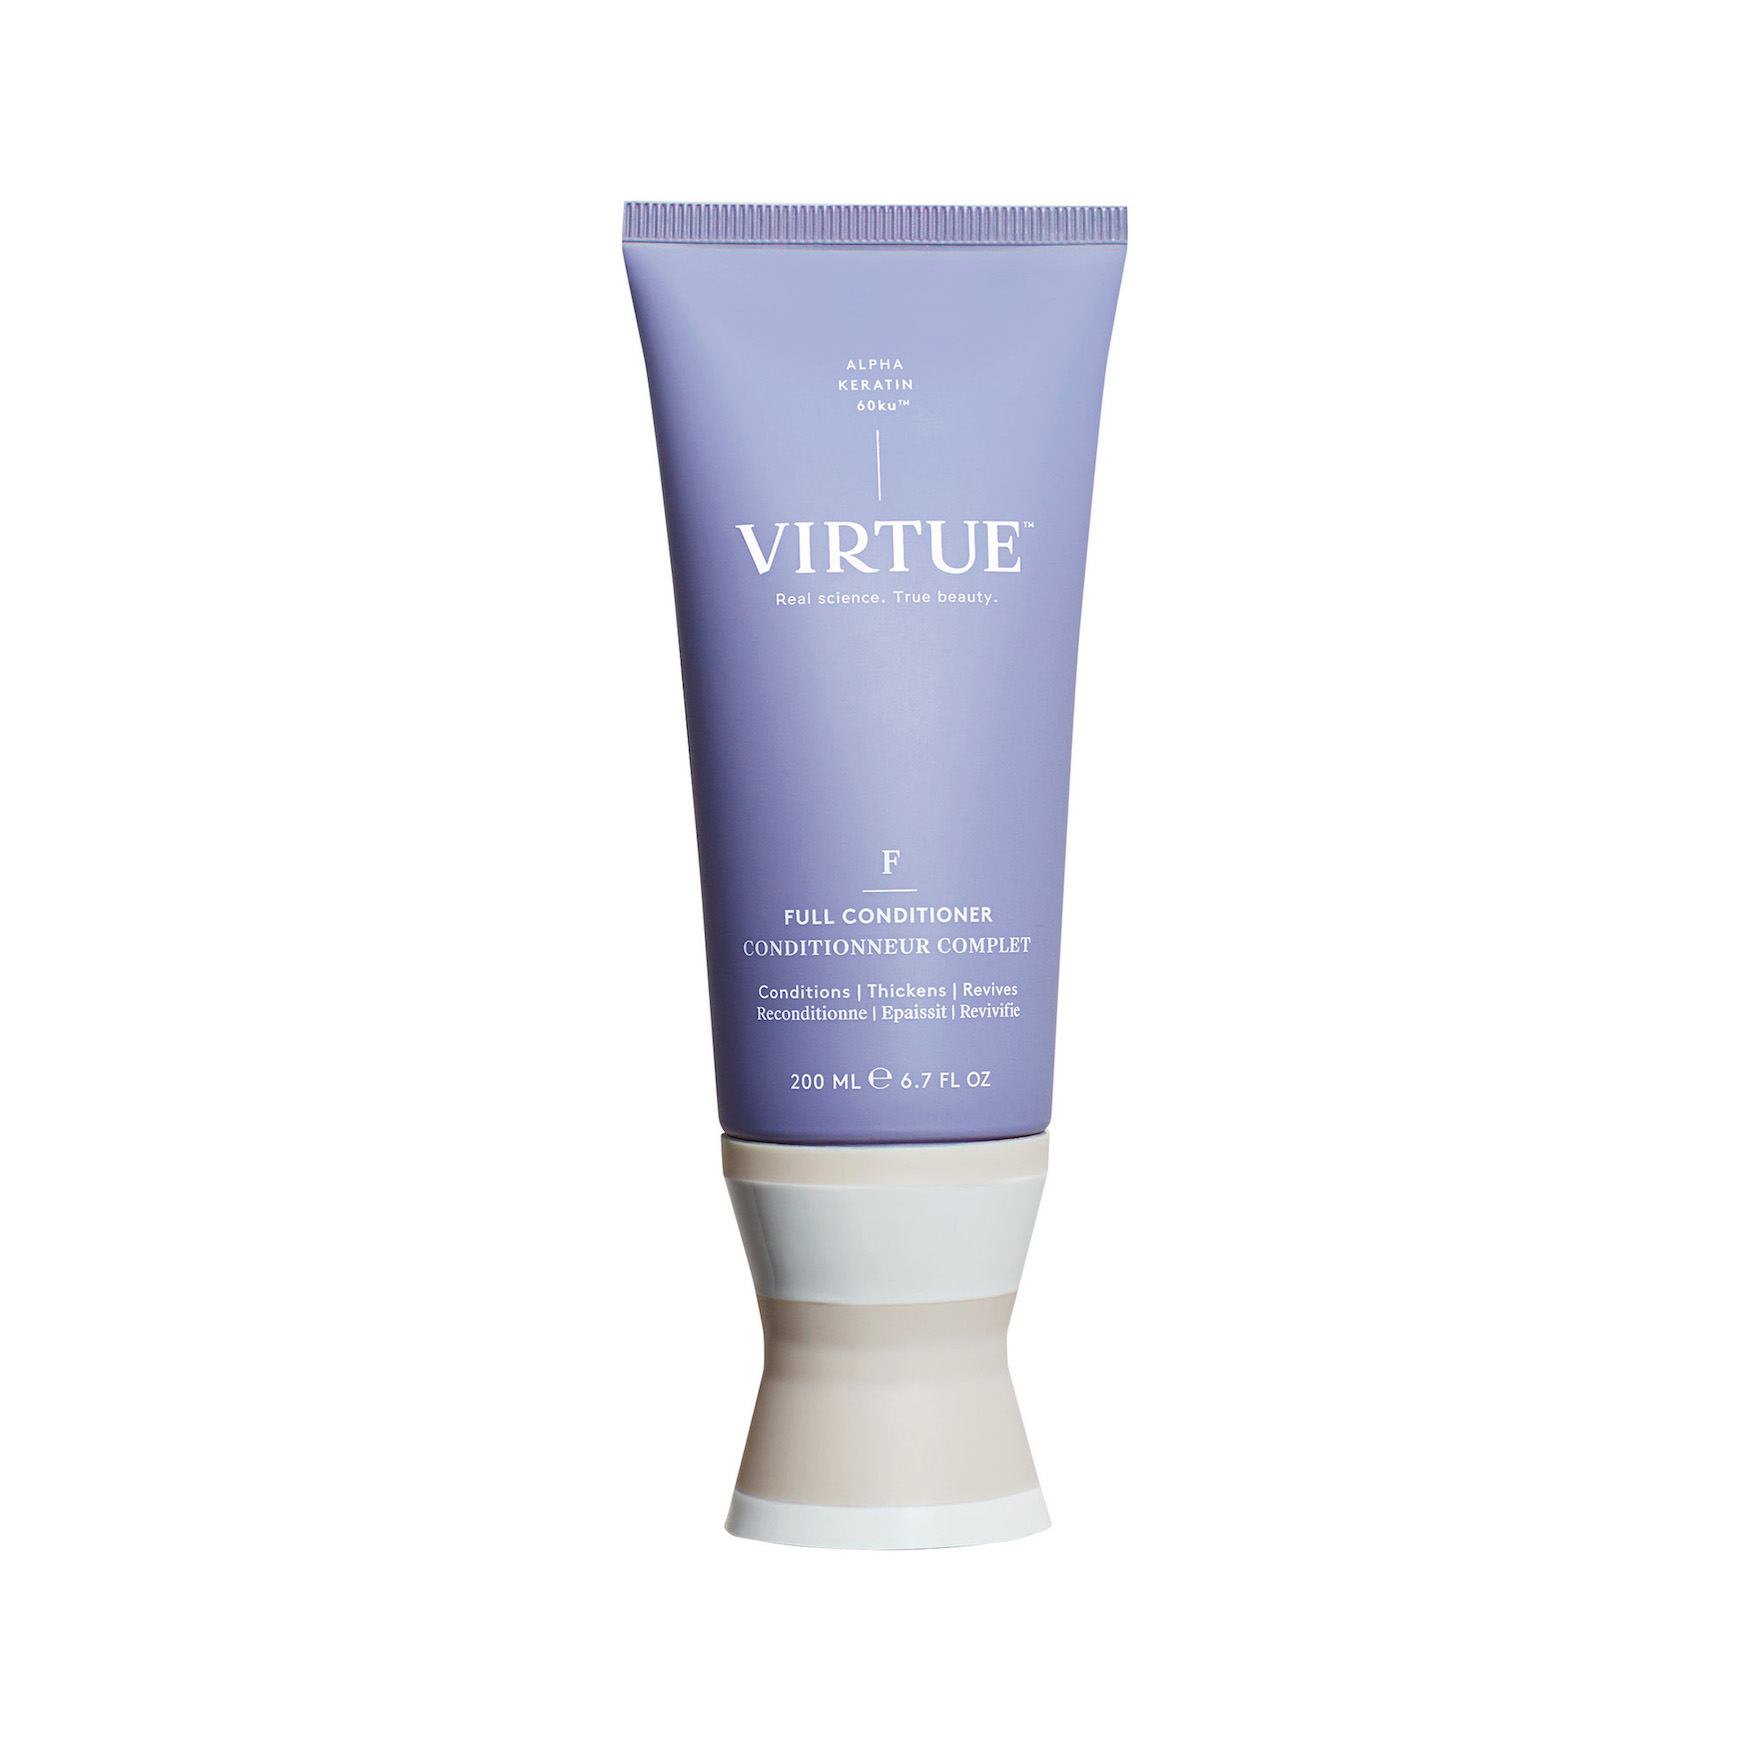 Virtue Full Conditioner | Space NK